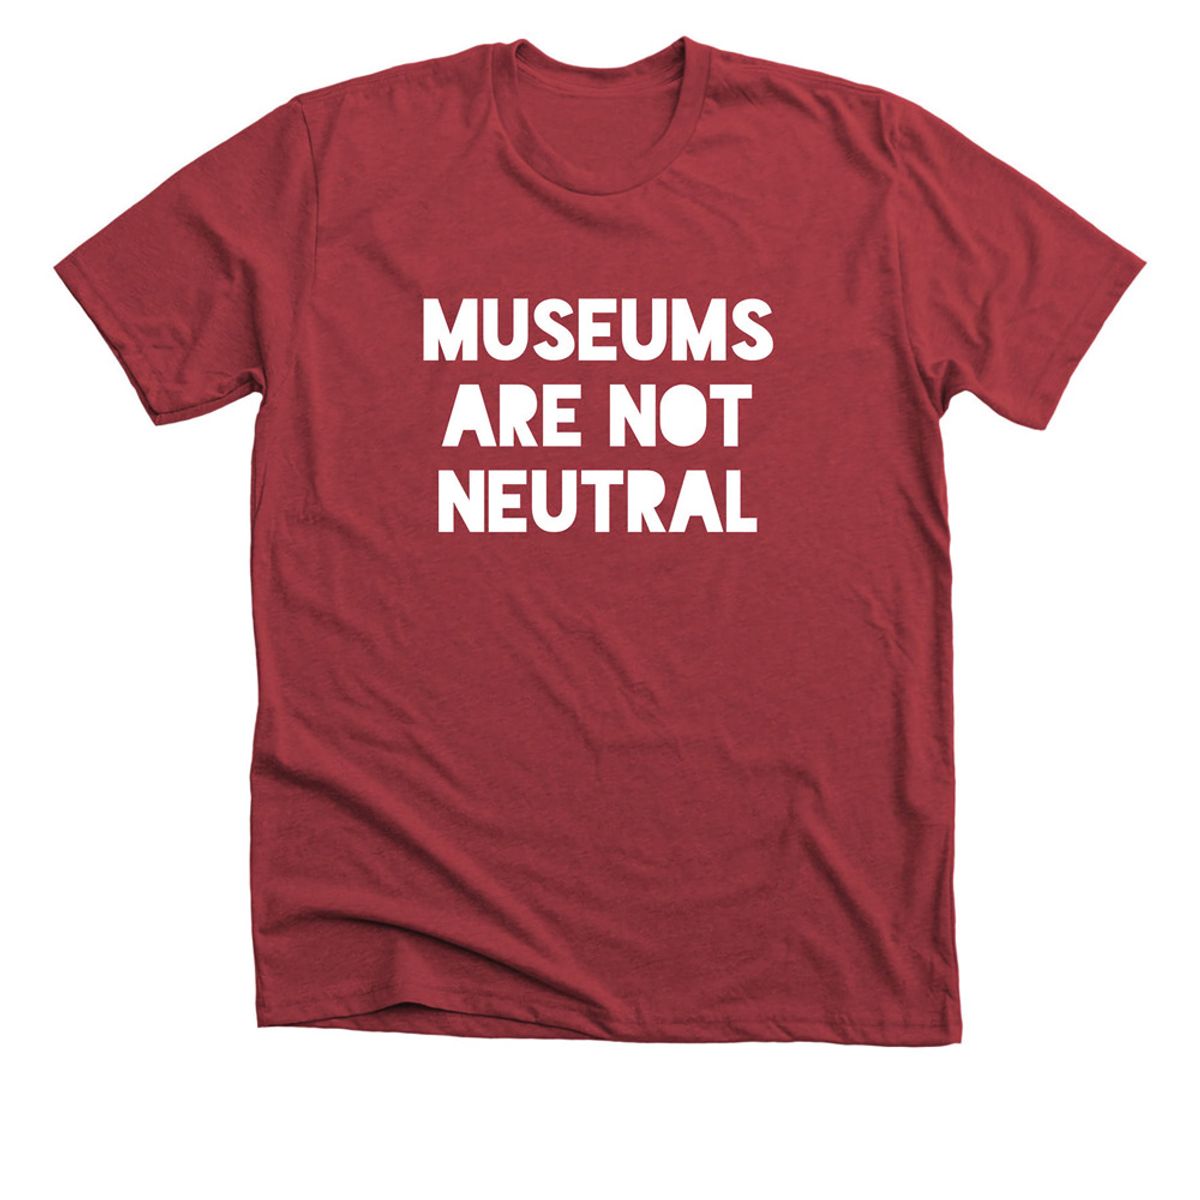 Mike Murawski and LaTanya Autry’s T-shirt, designed to "spark conversations about the role of museums" Mike Murawski